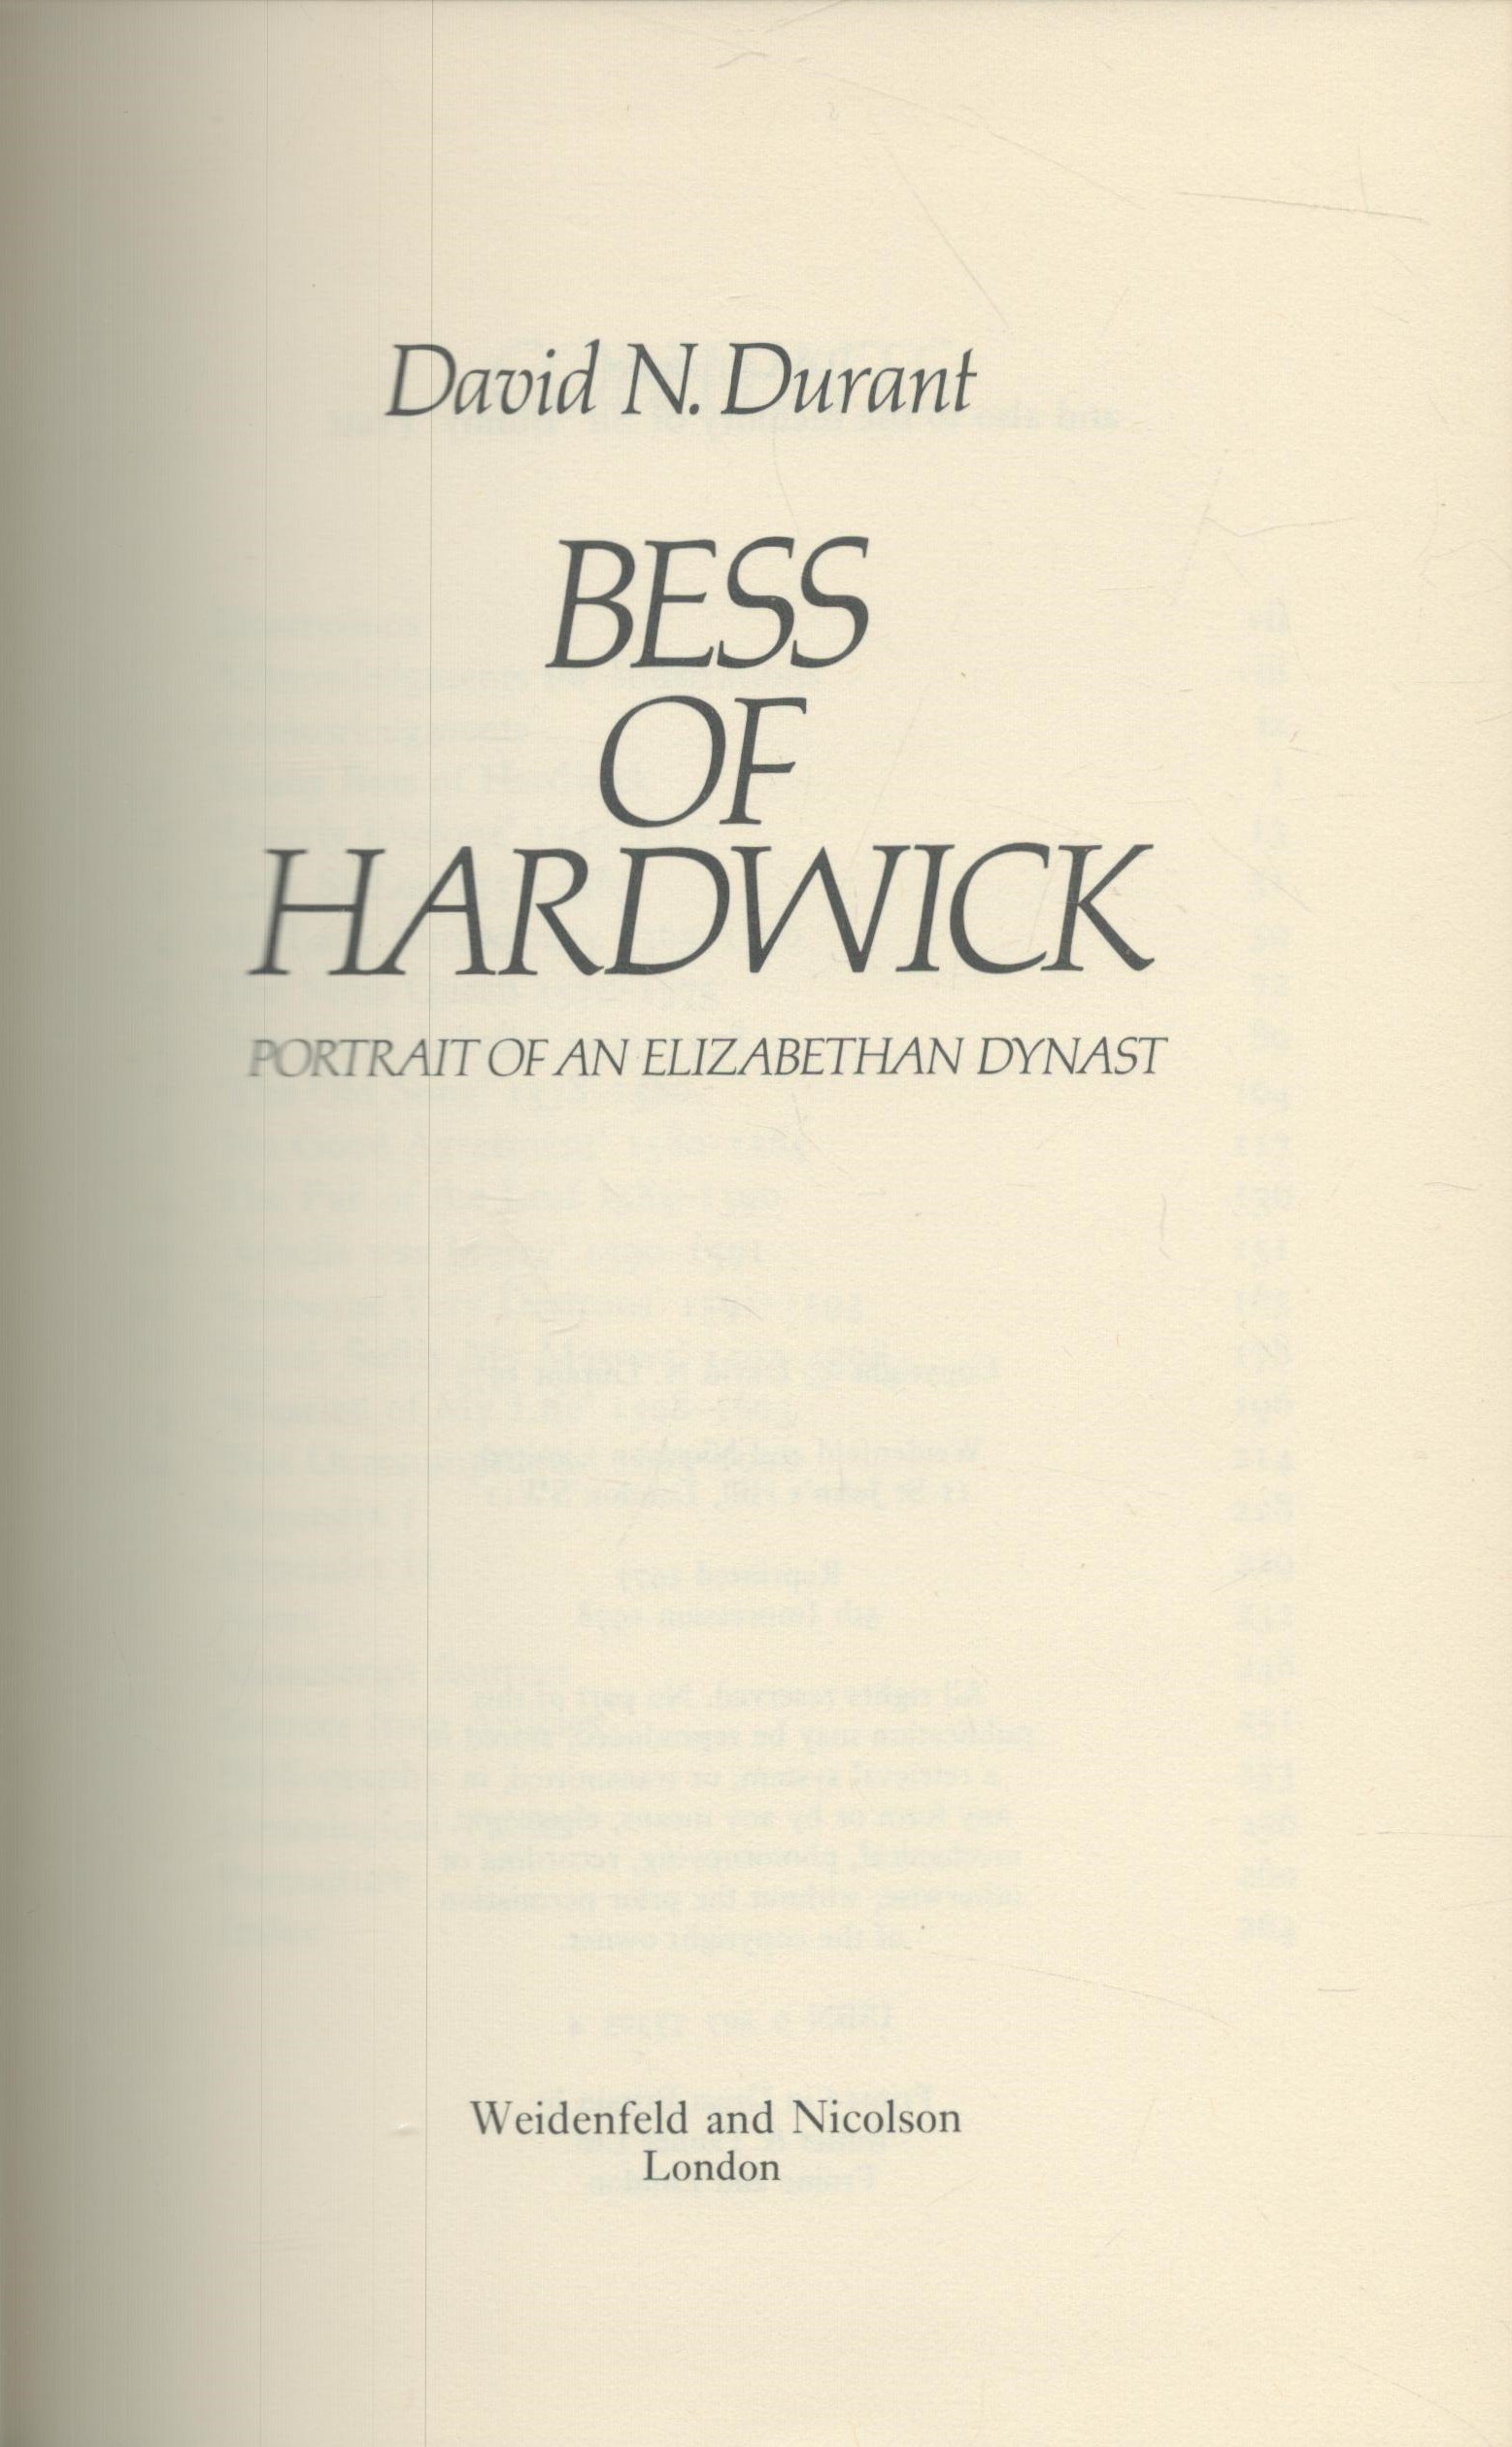 Bess of Hardwick - Portrait of an Elizabethan Dynast by David N Durant 1978 hardback book with 274 - Image 2 of 3